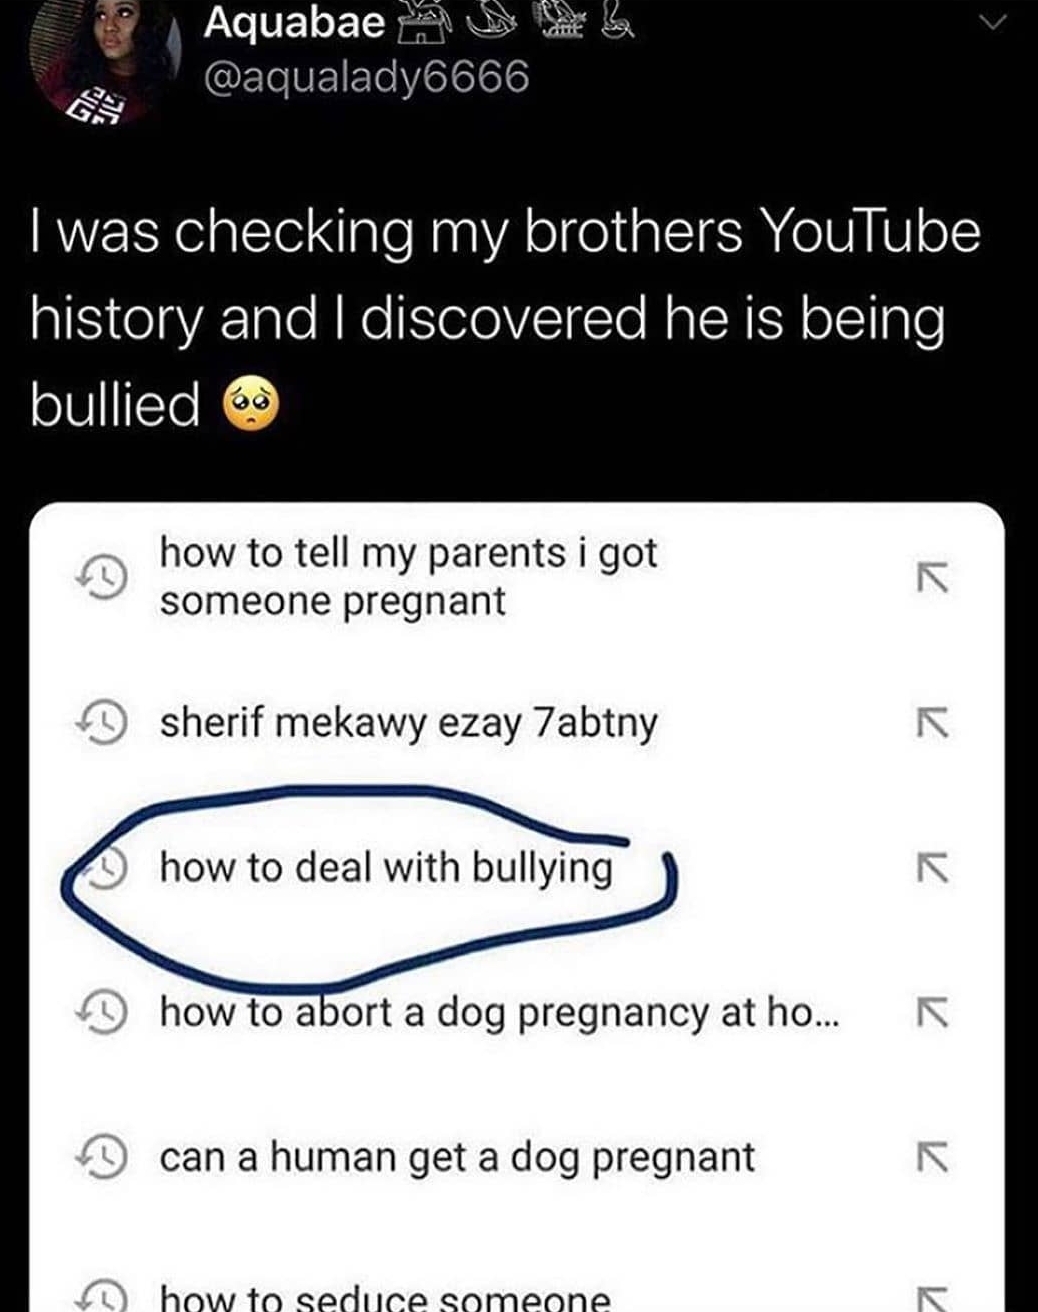 screenshot - Aquabae I was checking my brothers YouTube history and I discovered he is being bullied how to tell my parents i got someone pregnant sherif mekawy ezay 7abtny how to deal with bullying how to abort a dog pregnancy at ho... R can a human get 